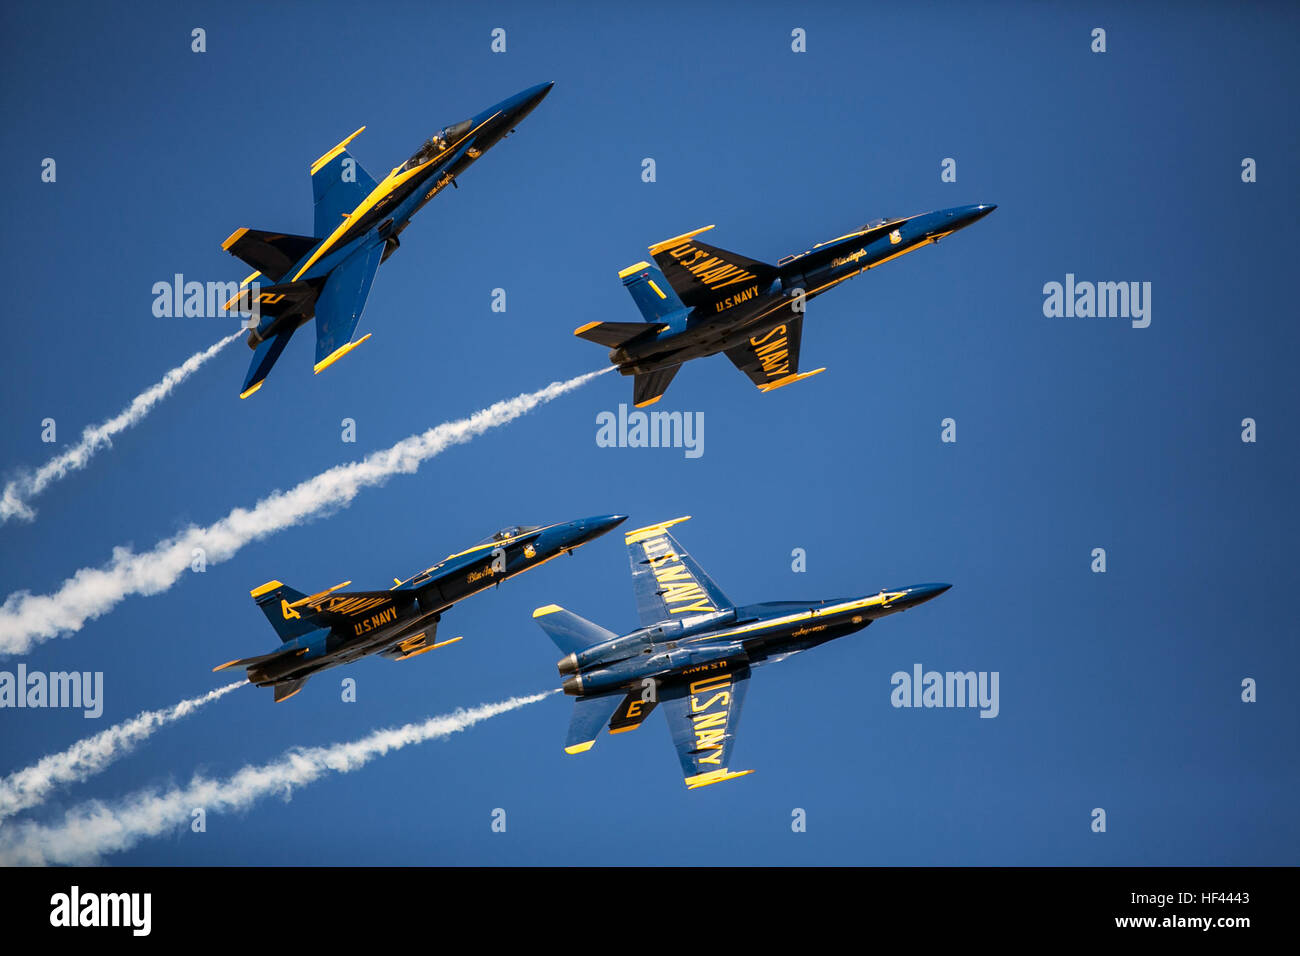 U.S. Navy Blue Angels perform a dramatic maneuver with their F/A-18 Hornets while flying in a precision aerobatic formation during the 2016 Marine Corps Air Station (MCAS) Miramar Air Show at MCAS Miramar, Calif., Sept. 24, 2016. This year’s air show is dedicated to recognizing 100 years of the Marine Corps Reserves. (U.S. Marine Corps photo by Lance Cpl. Ariana Castro/RELEASED)160924-M-RZ188-017Join the conversation: http://www.navy.mil/viewGallery.asp http://www.facebook.com/USNavy http://www.twitter.com/USNavy http://navylive.dodlive.mil http://pinterest.com https://plus.google.com U.S. Nav Stock Photo